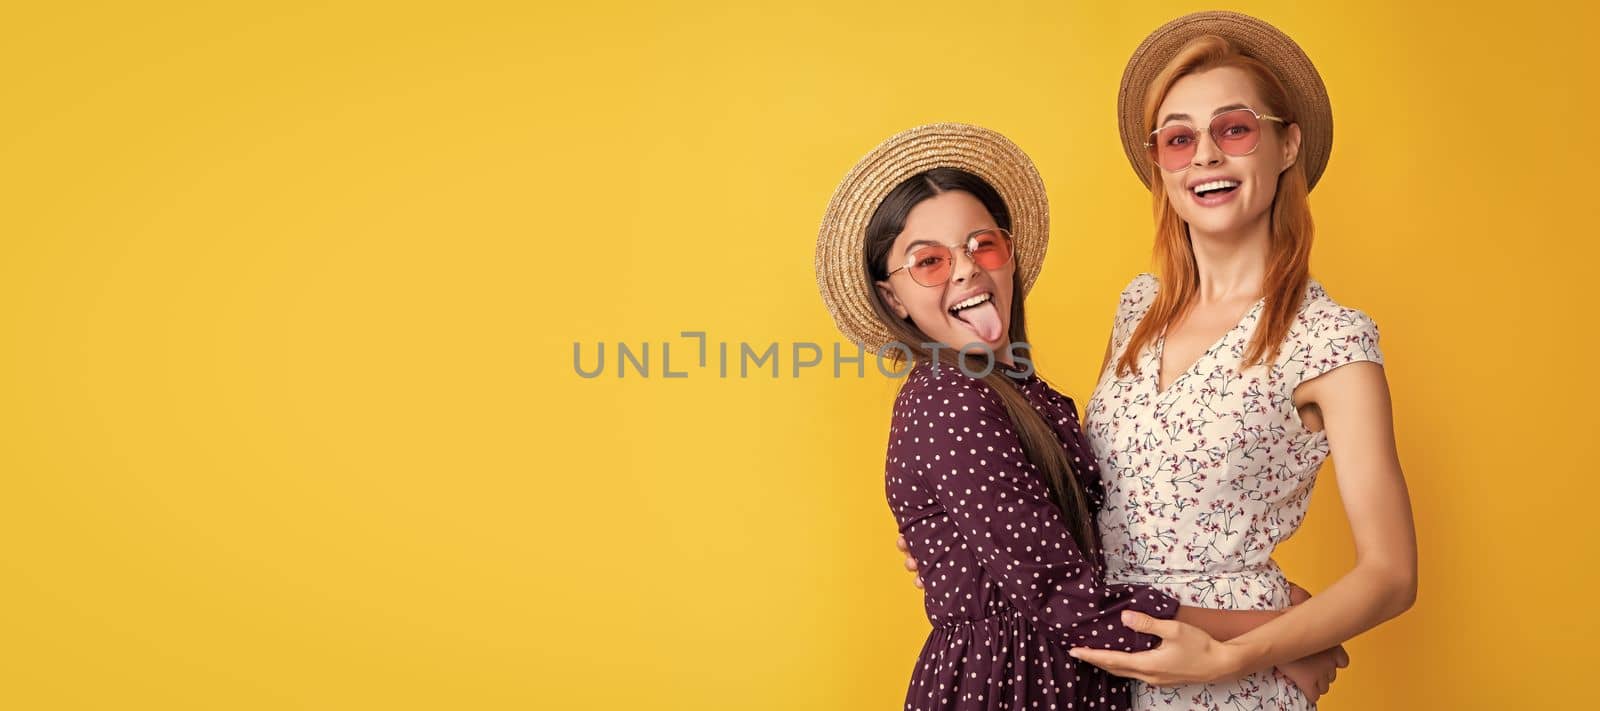 Mother and daughter kid banner, copy space, isolated background. glad mom and daughter in straw hat on yellow background